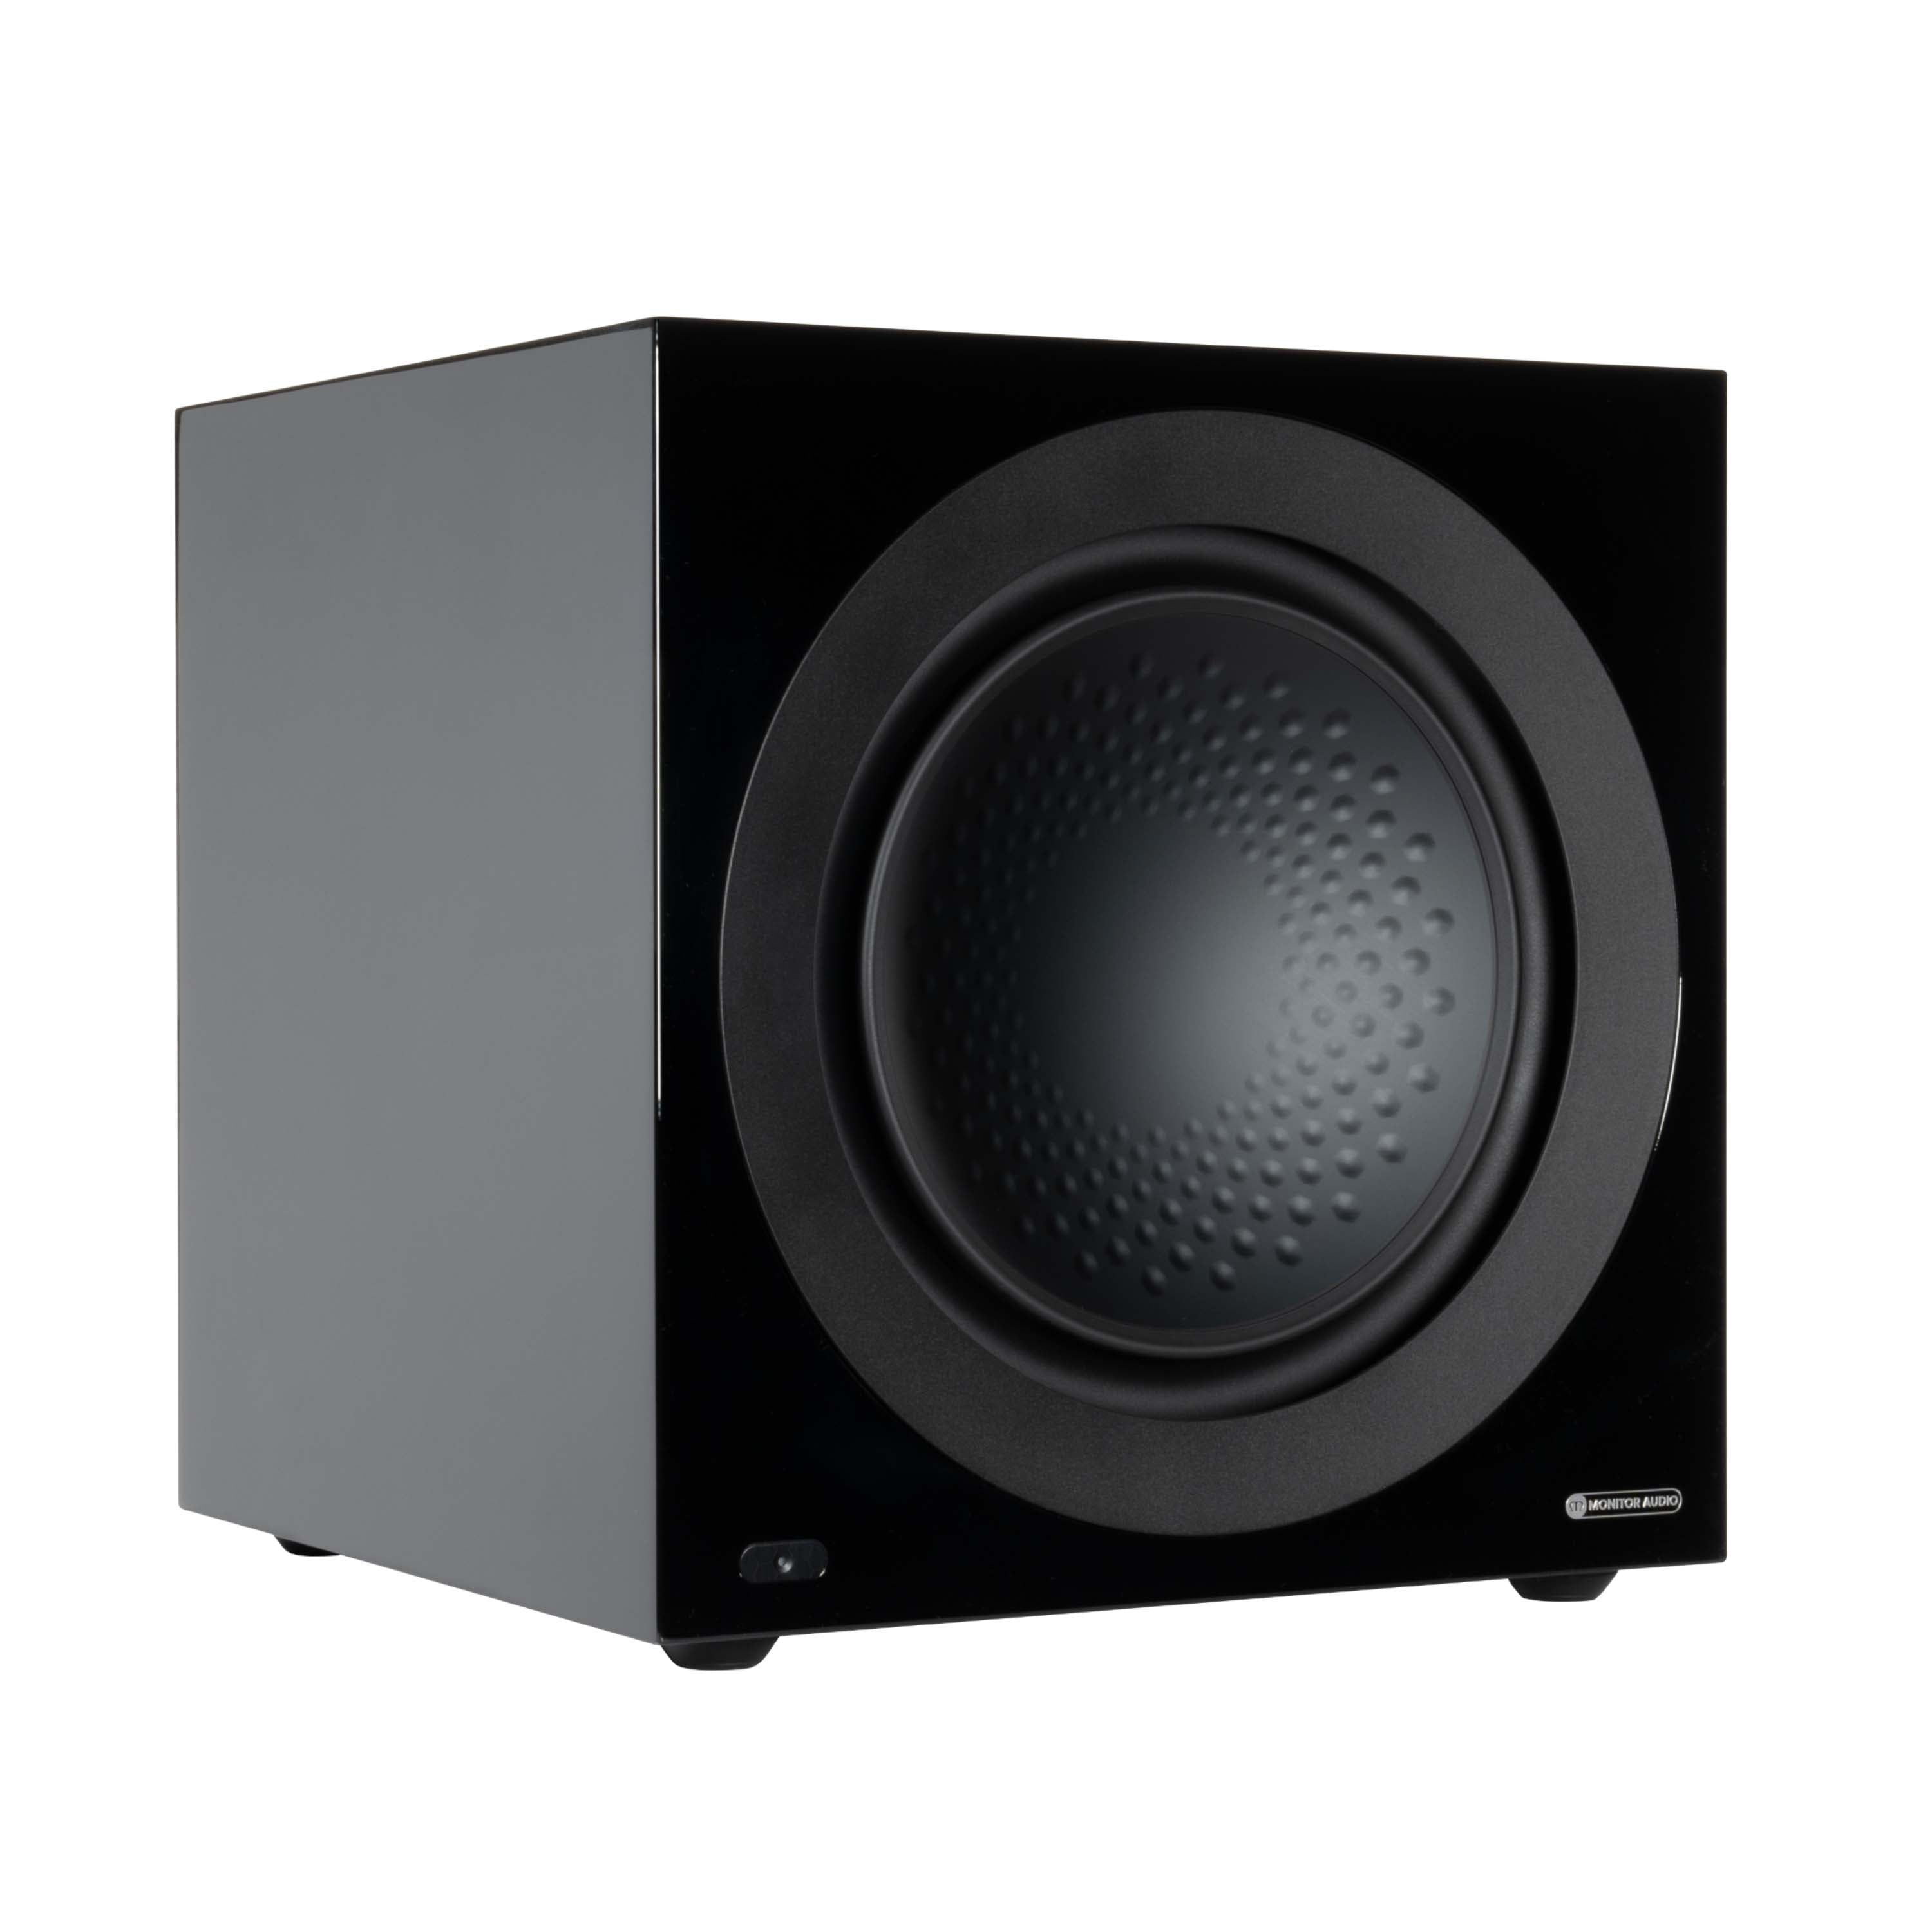 Monitor Audio Anthra W15 15" Active Subwoofer - Black (Available in September.  Preorder now)